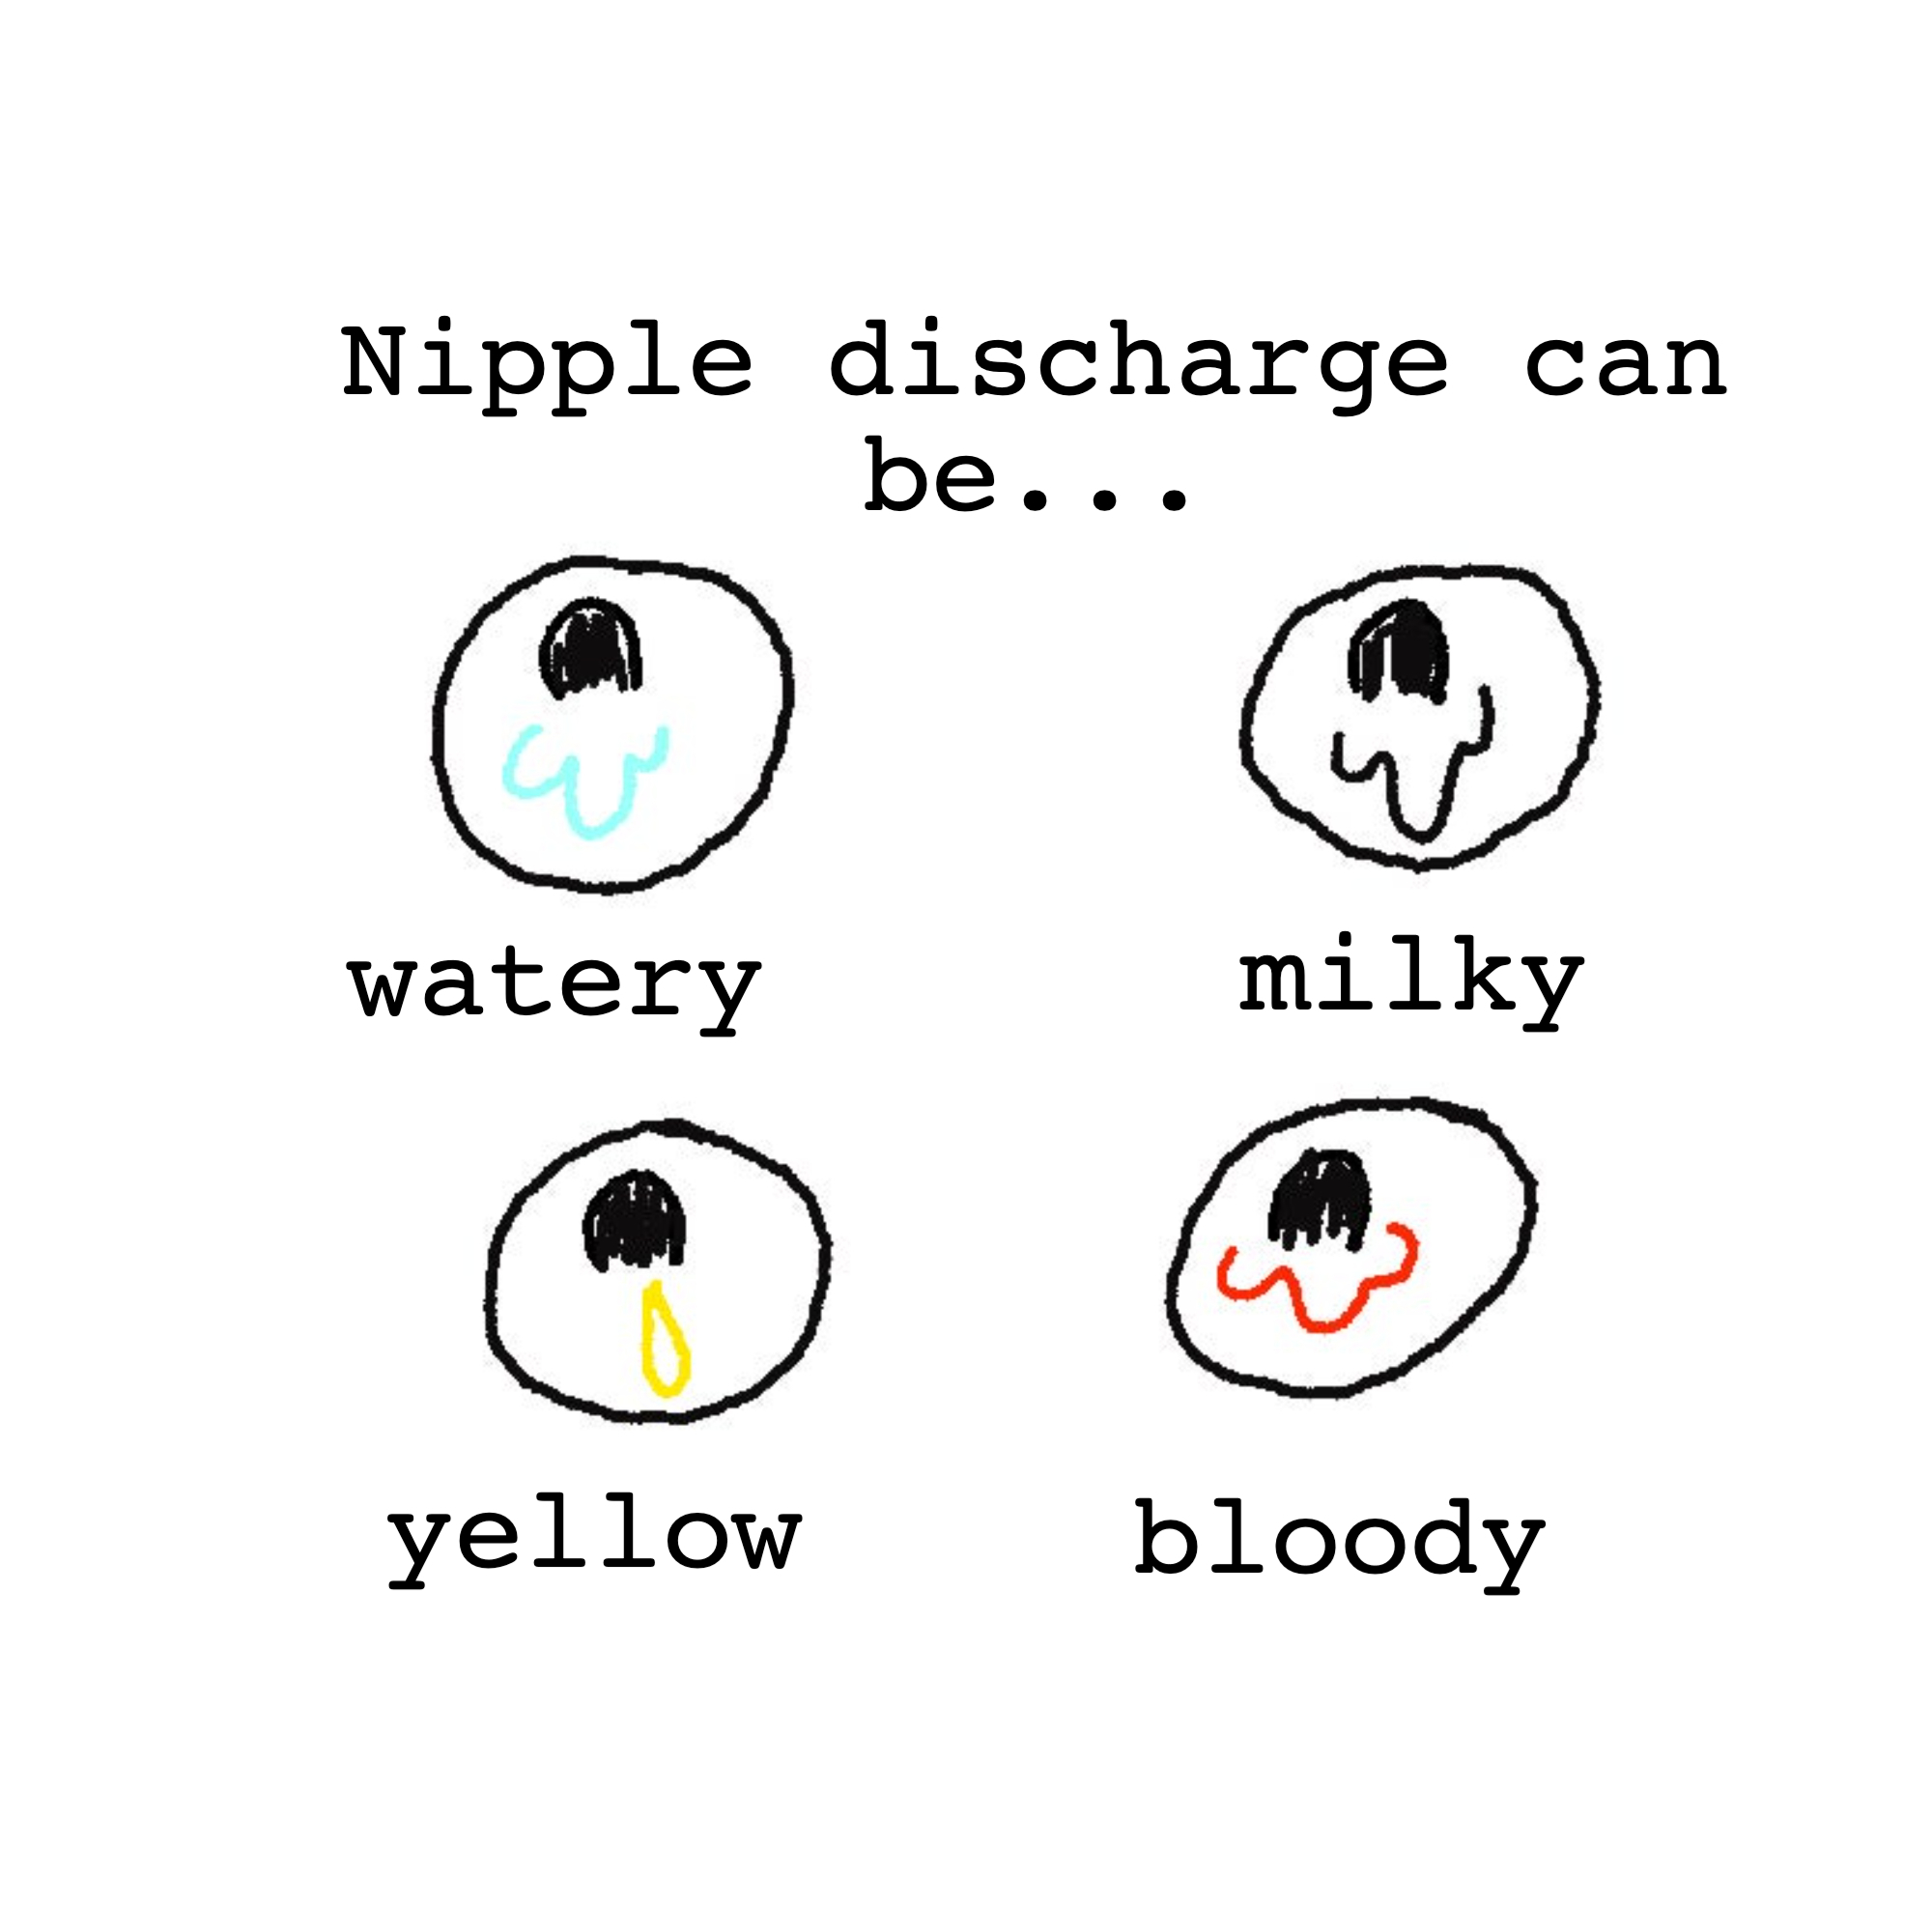 nipple discharge can be watery milky yellow or bloody